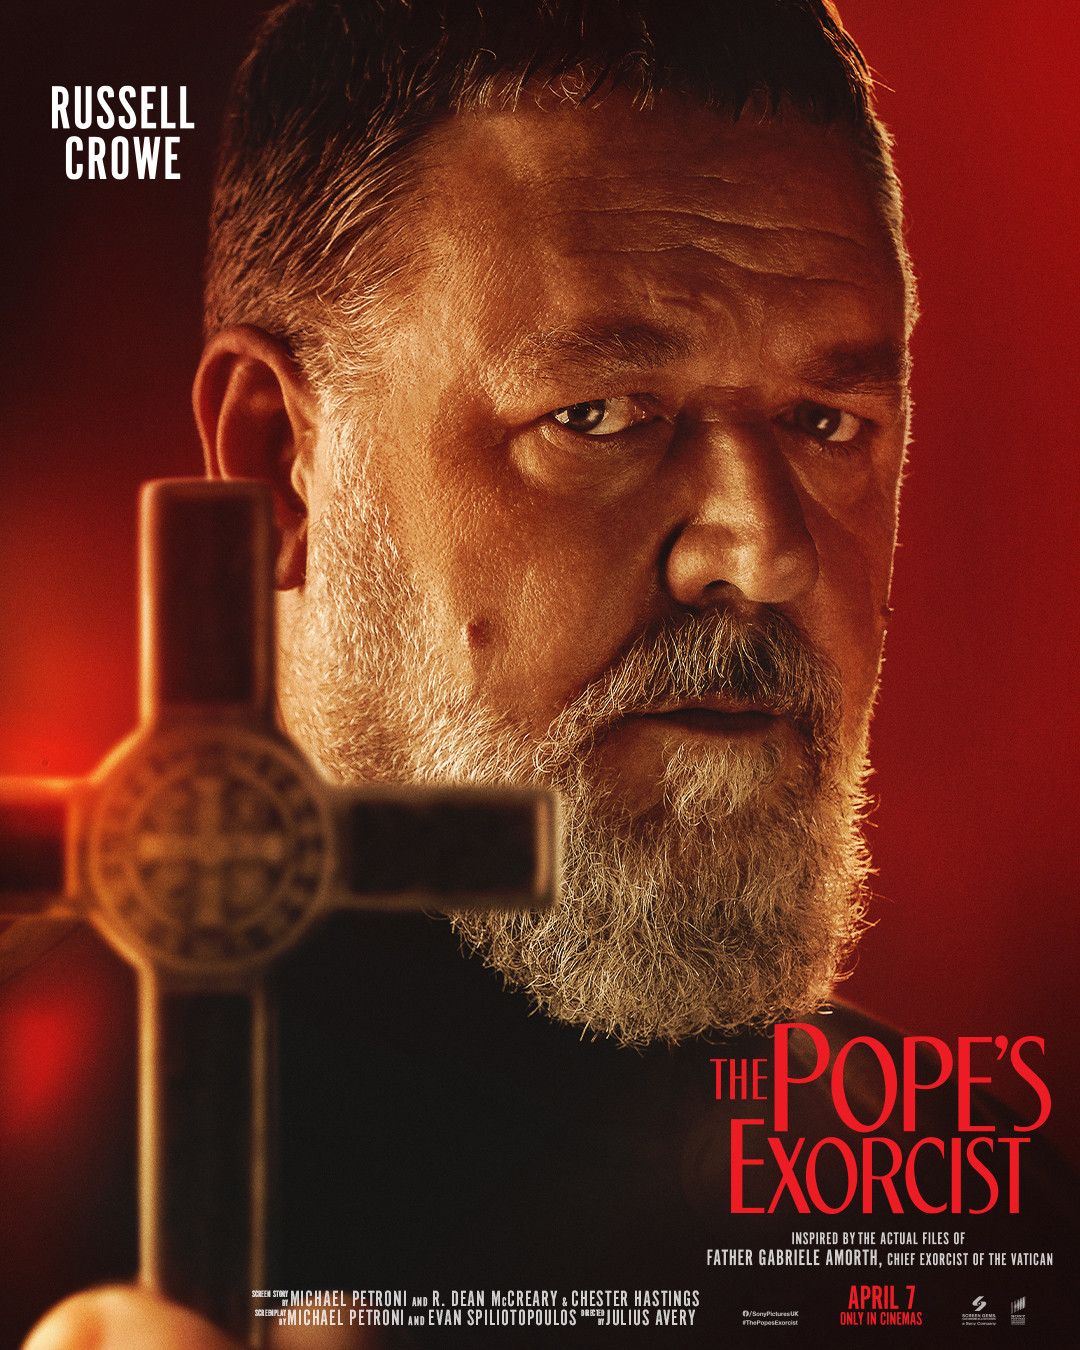 Russell Crowe poses dramatically in front of a devilish red background while holding up a wooden crucifix in The Pope's Exorcist movie poster